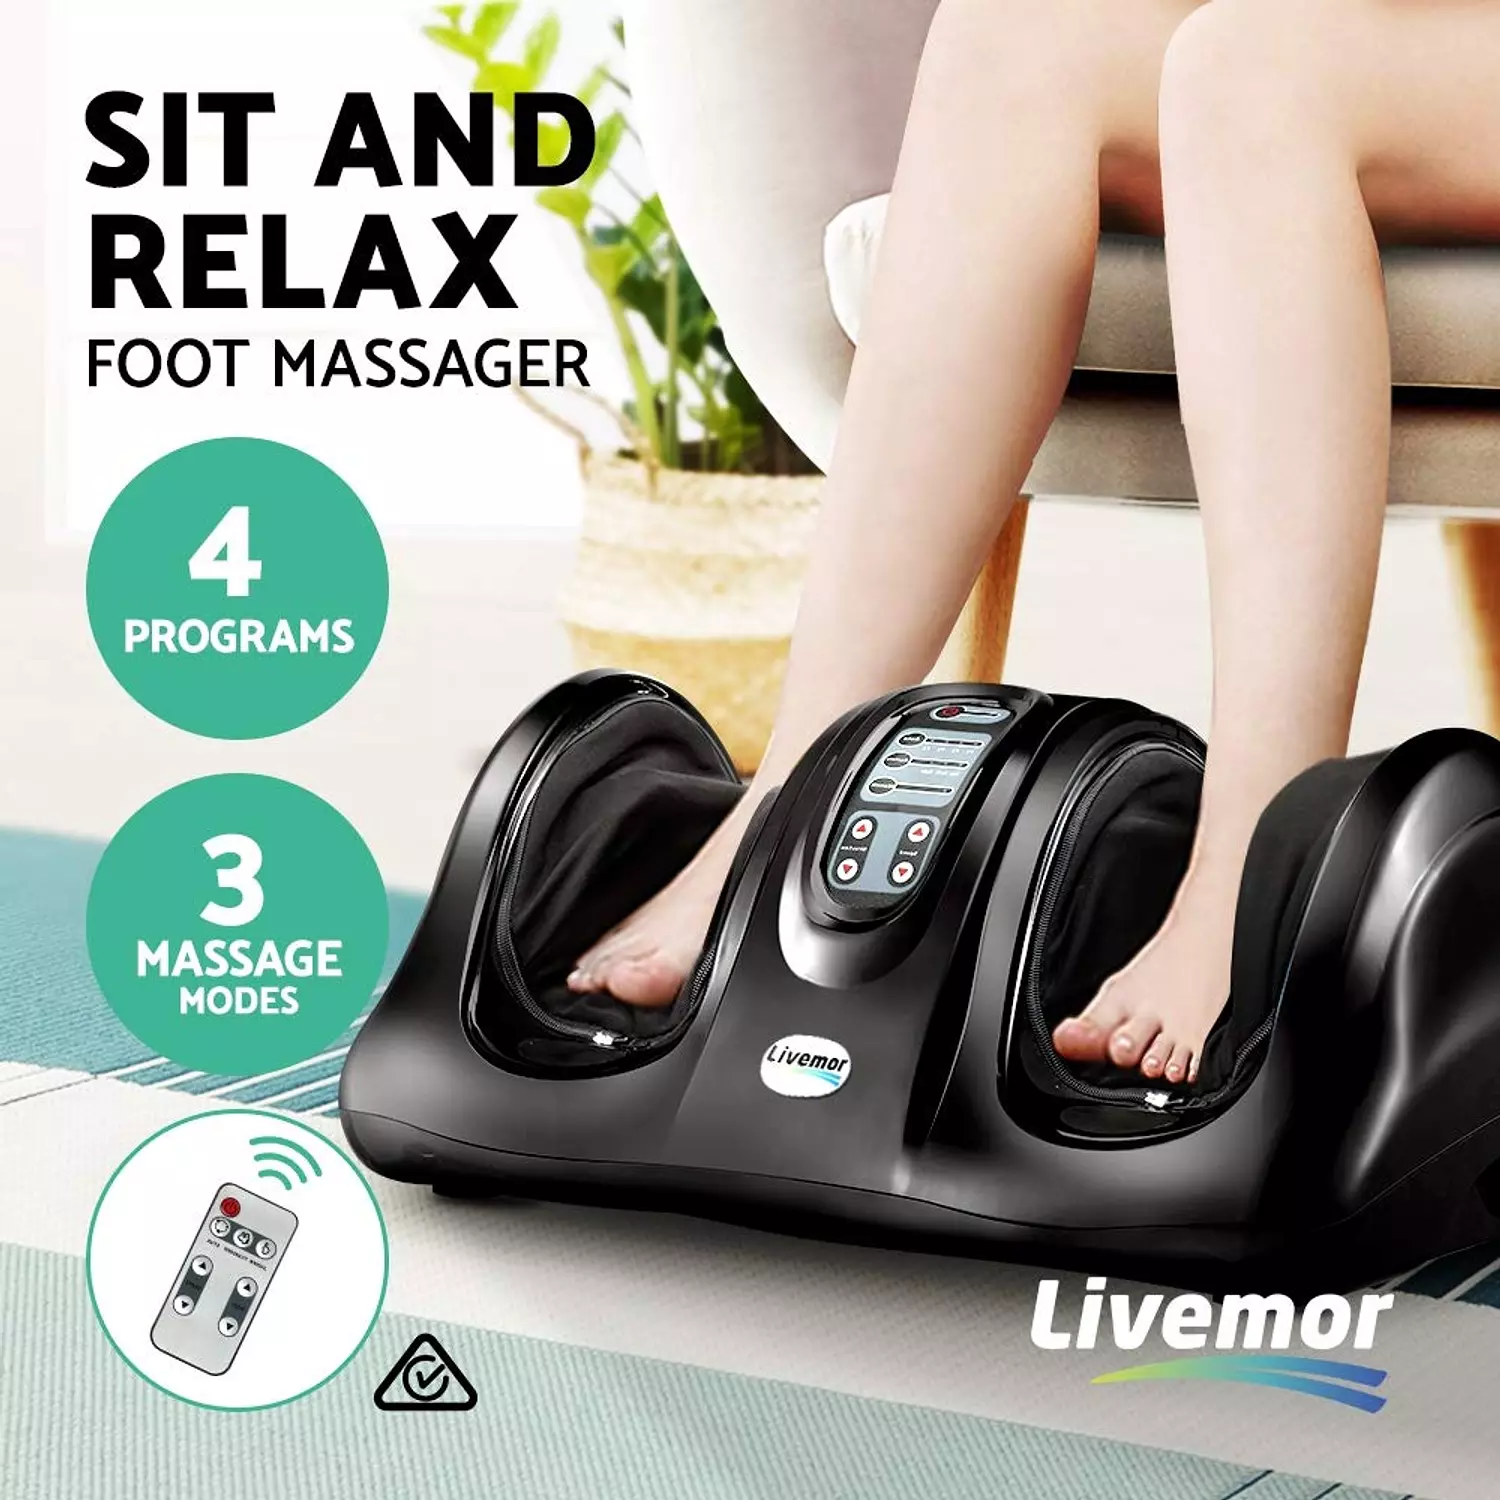 Foot Massager - Shiatsu Kneading and Rolling Foot Massager hover image